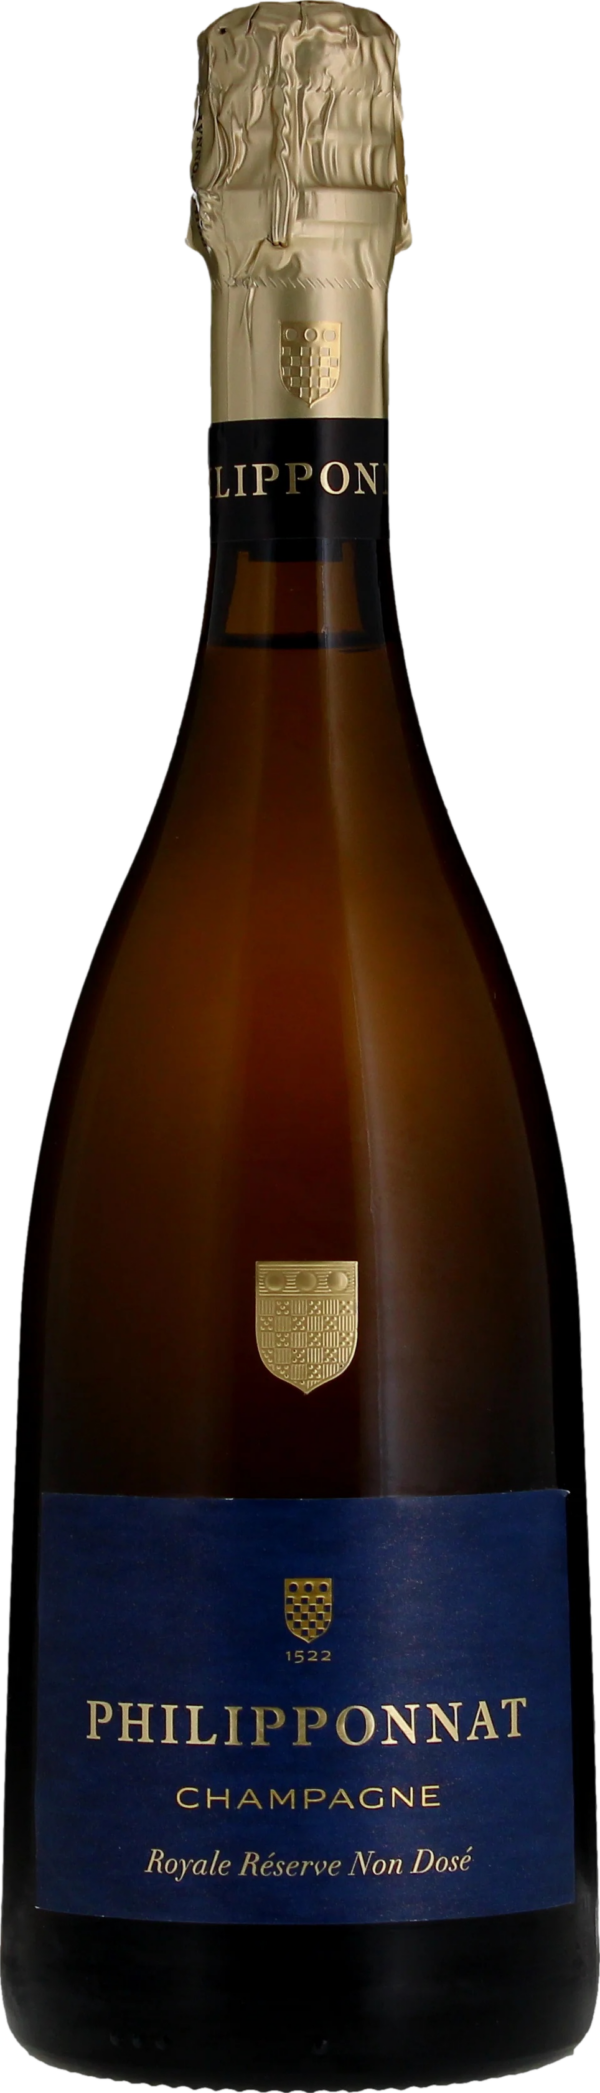 Product image of Champagne Philipponnat Royale Reserve Non Dose Brut from 8wines